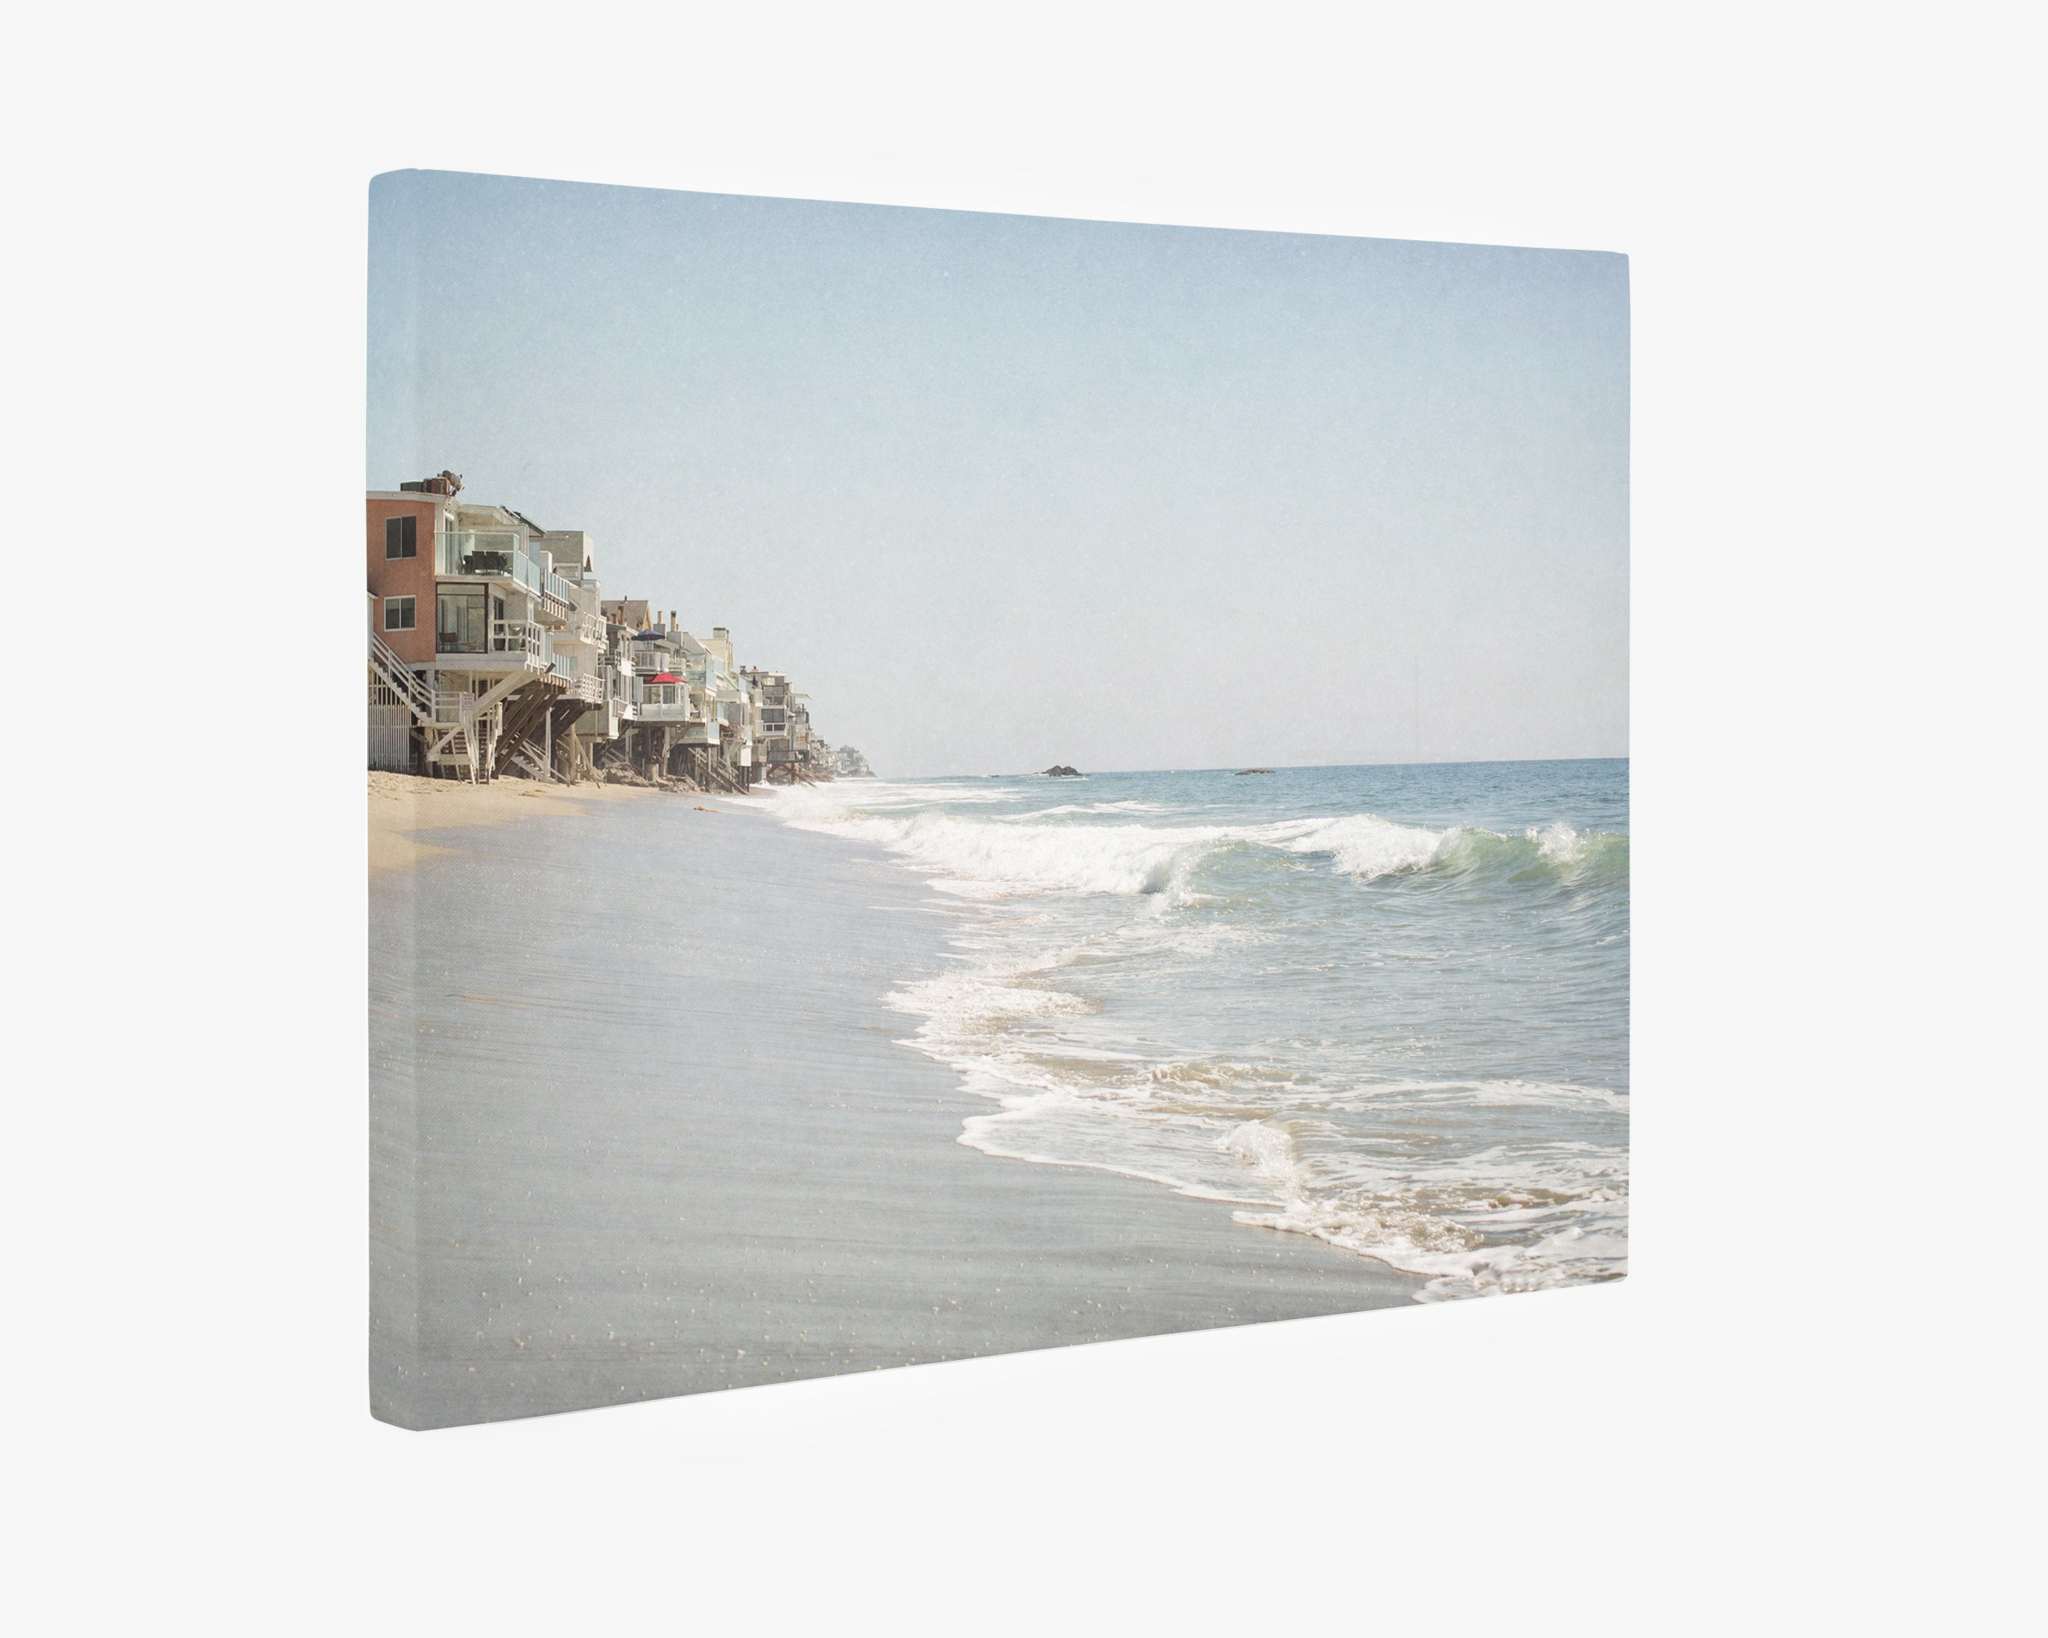 The Offley Green Malibu Beach House Canvas Wall Art, 'Ocean View' features a serene beach scene with gentle waves meeting a sandy shore. Coastal homes on stilts line the left side of the image, reminiscent of the Malibu coastline, extending into the distance under a clear blue sky and evoking a peaceful and tranquil ambiance. Perfect wall art.